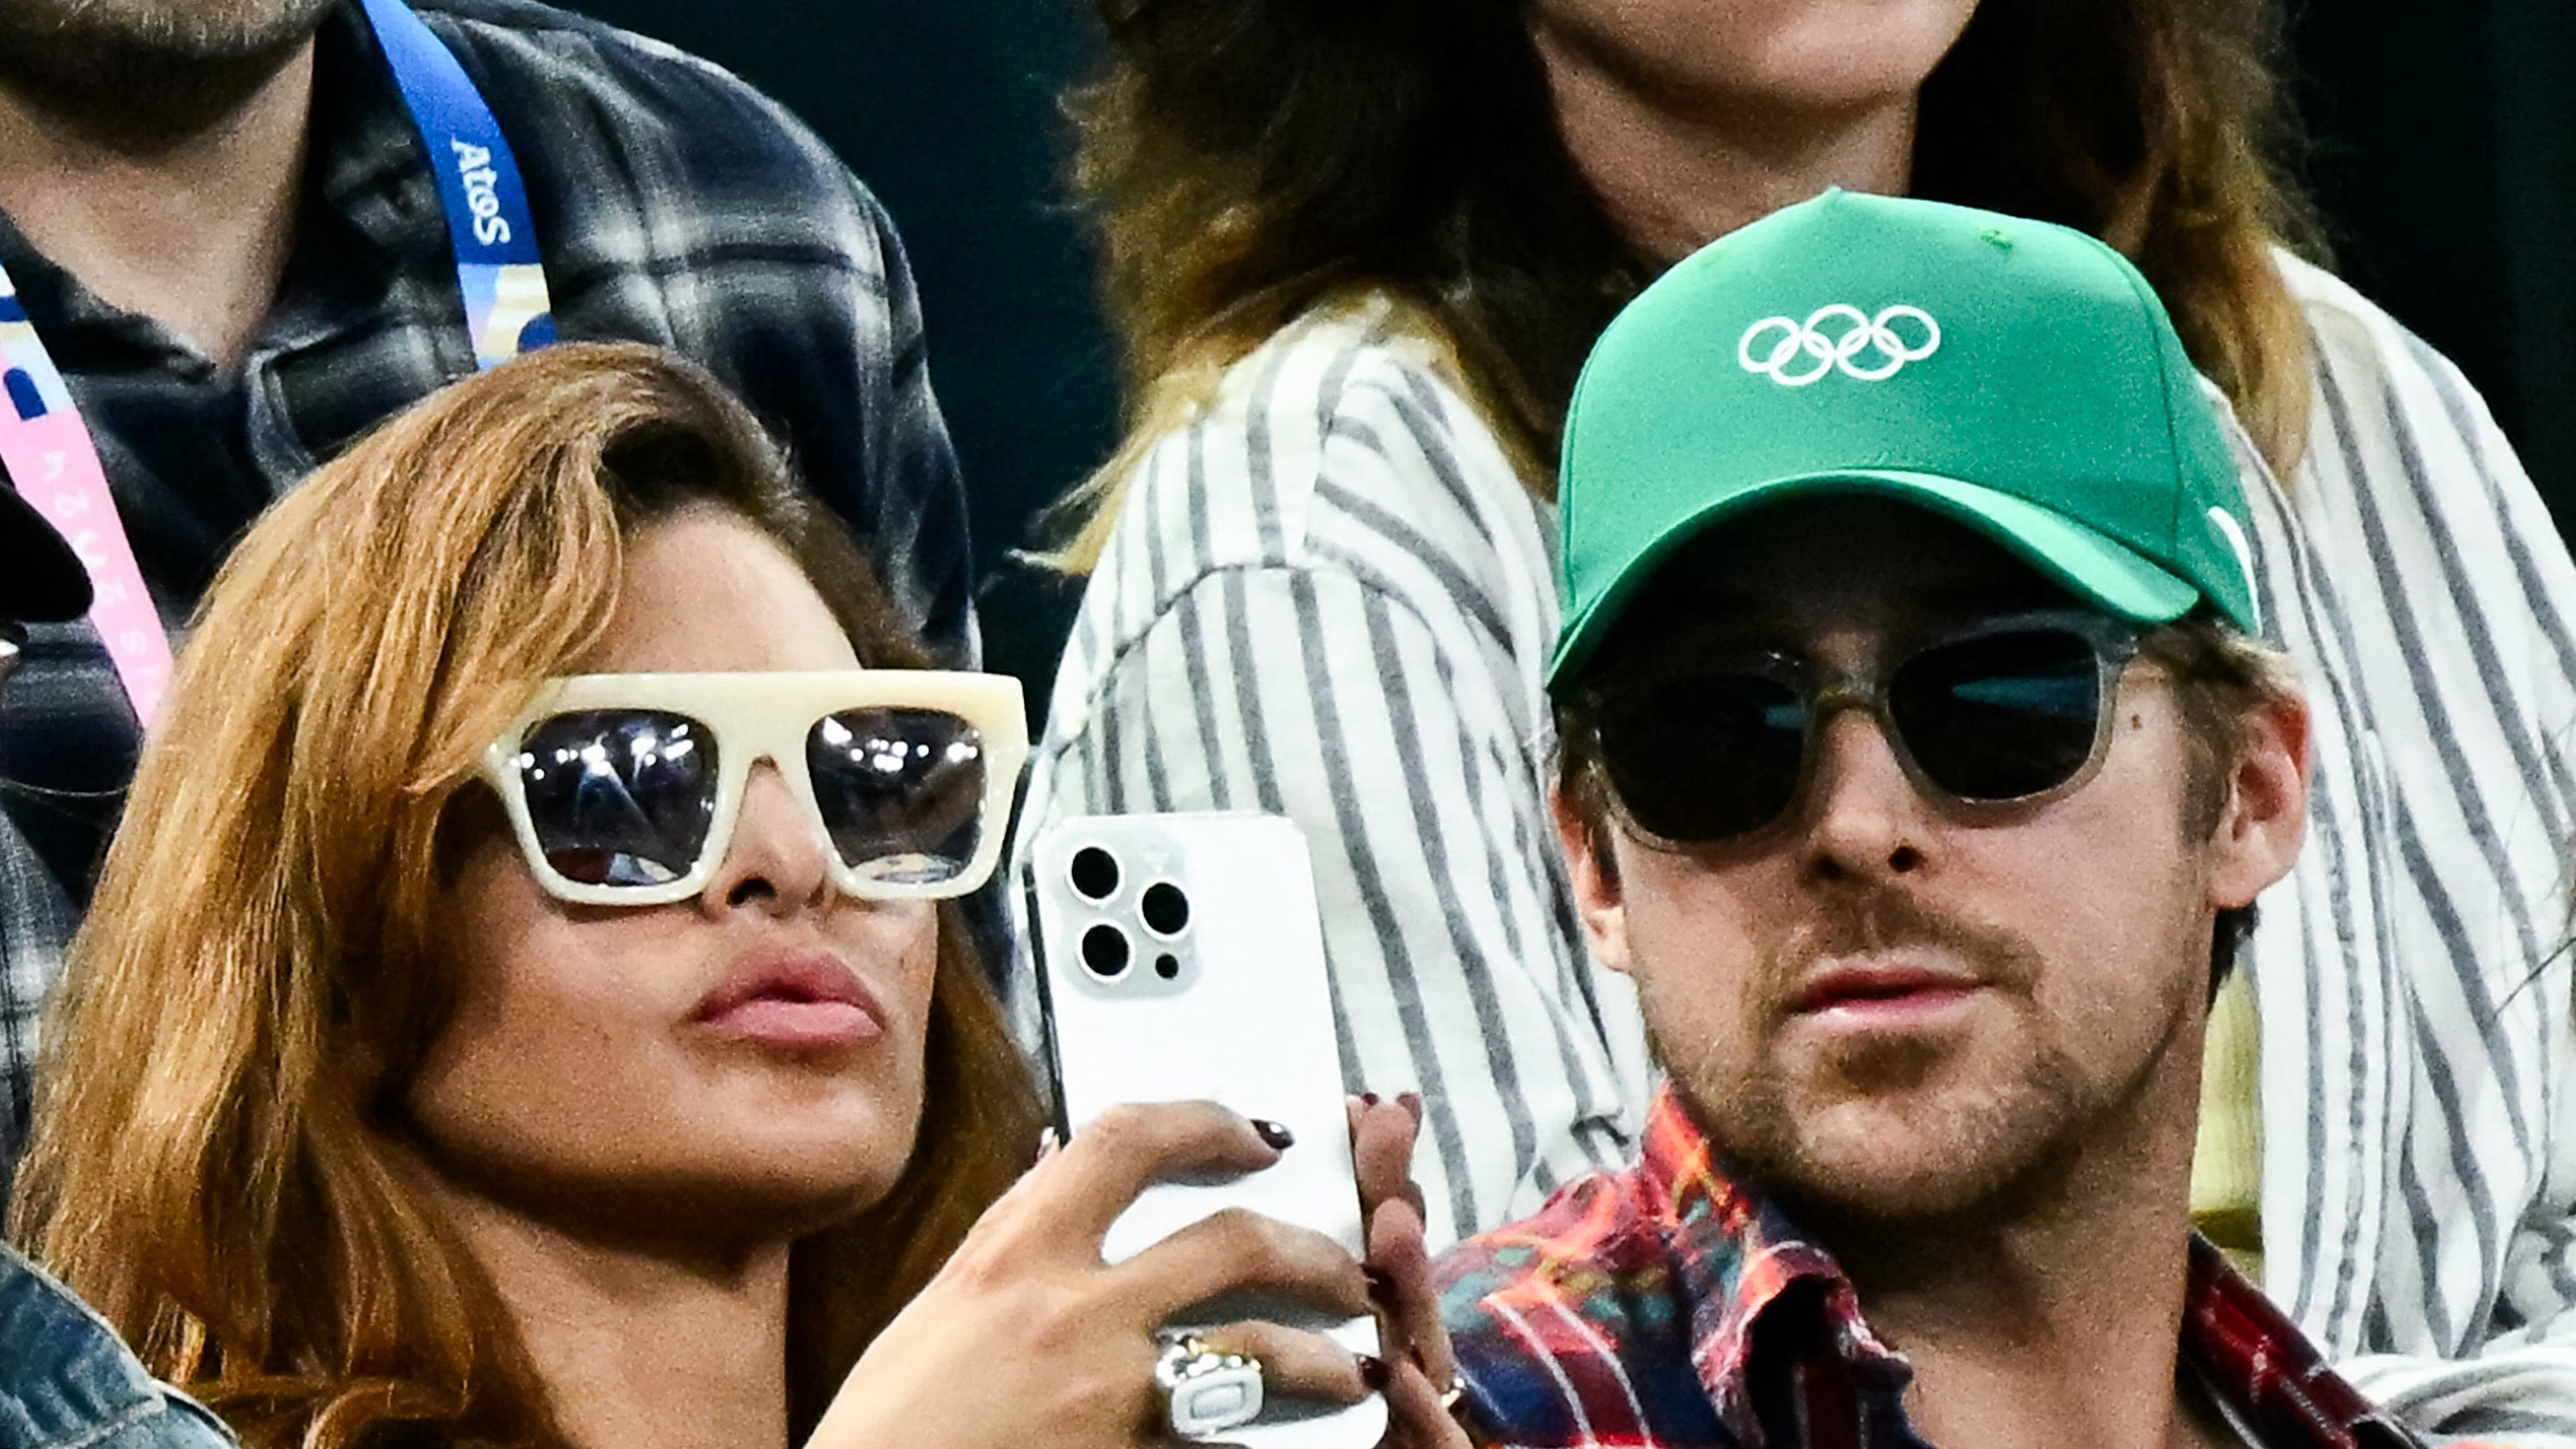 Ryan Gosling and Eva Mendes make rare public appearance together at Paris Olympics